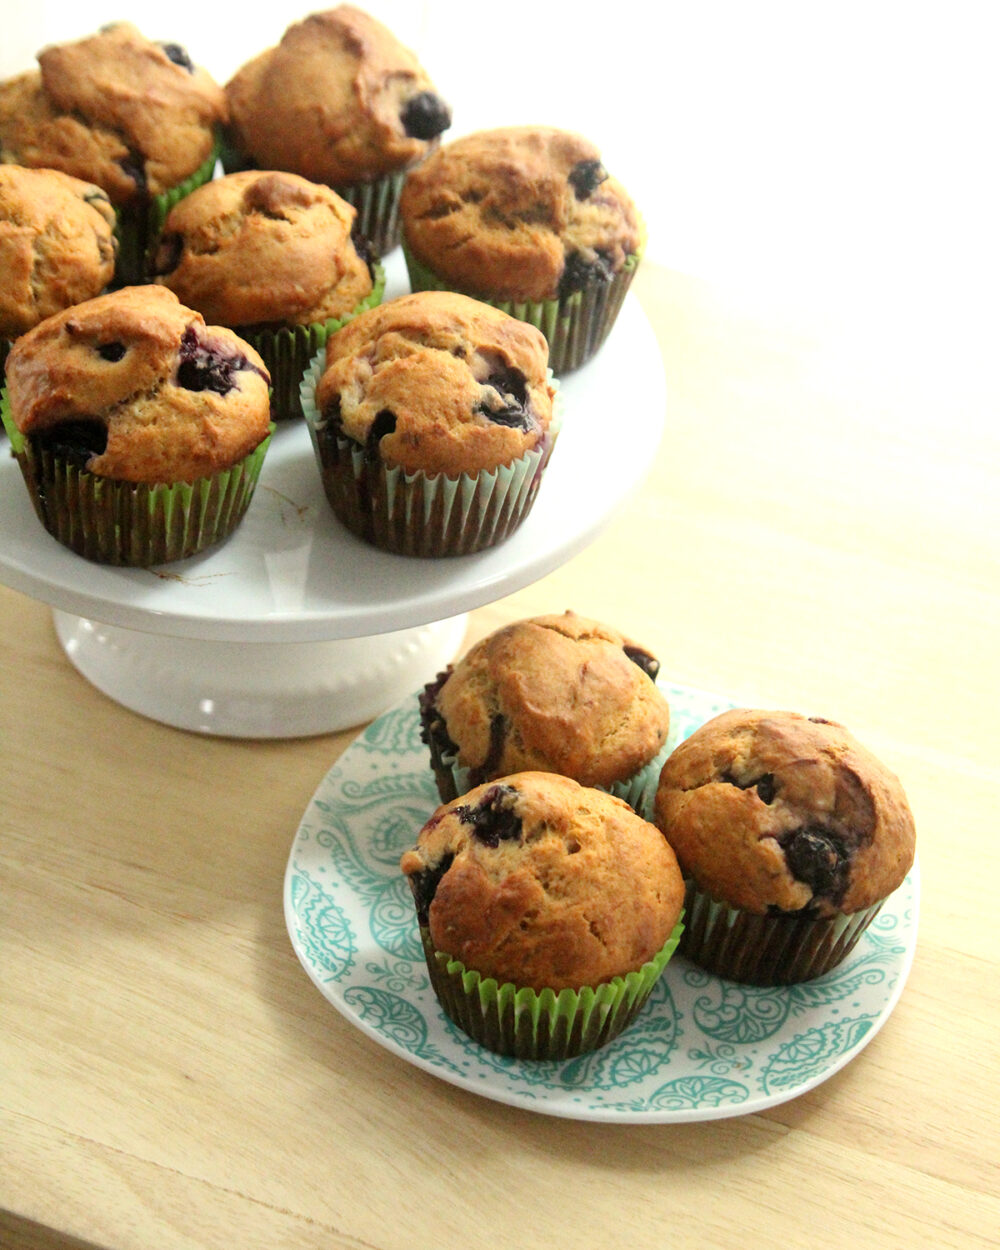 A plate and a cake stand filled with Blueberry Banana Muffins sit on a counter.